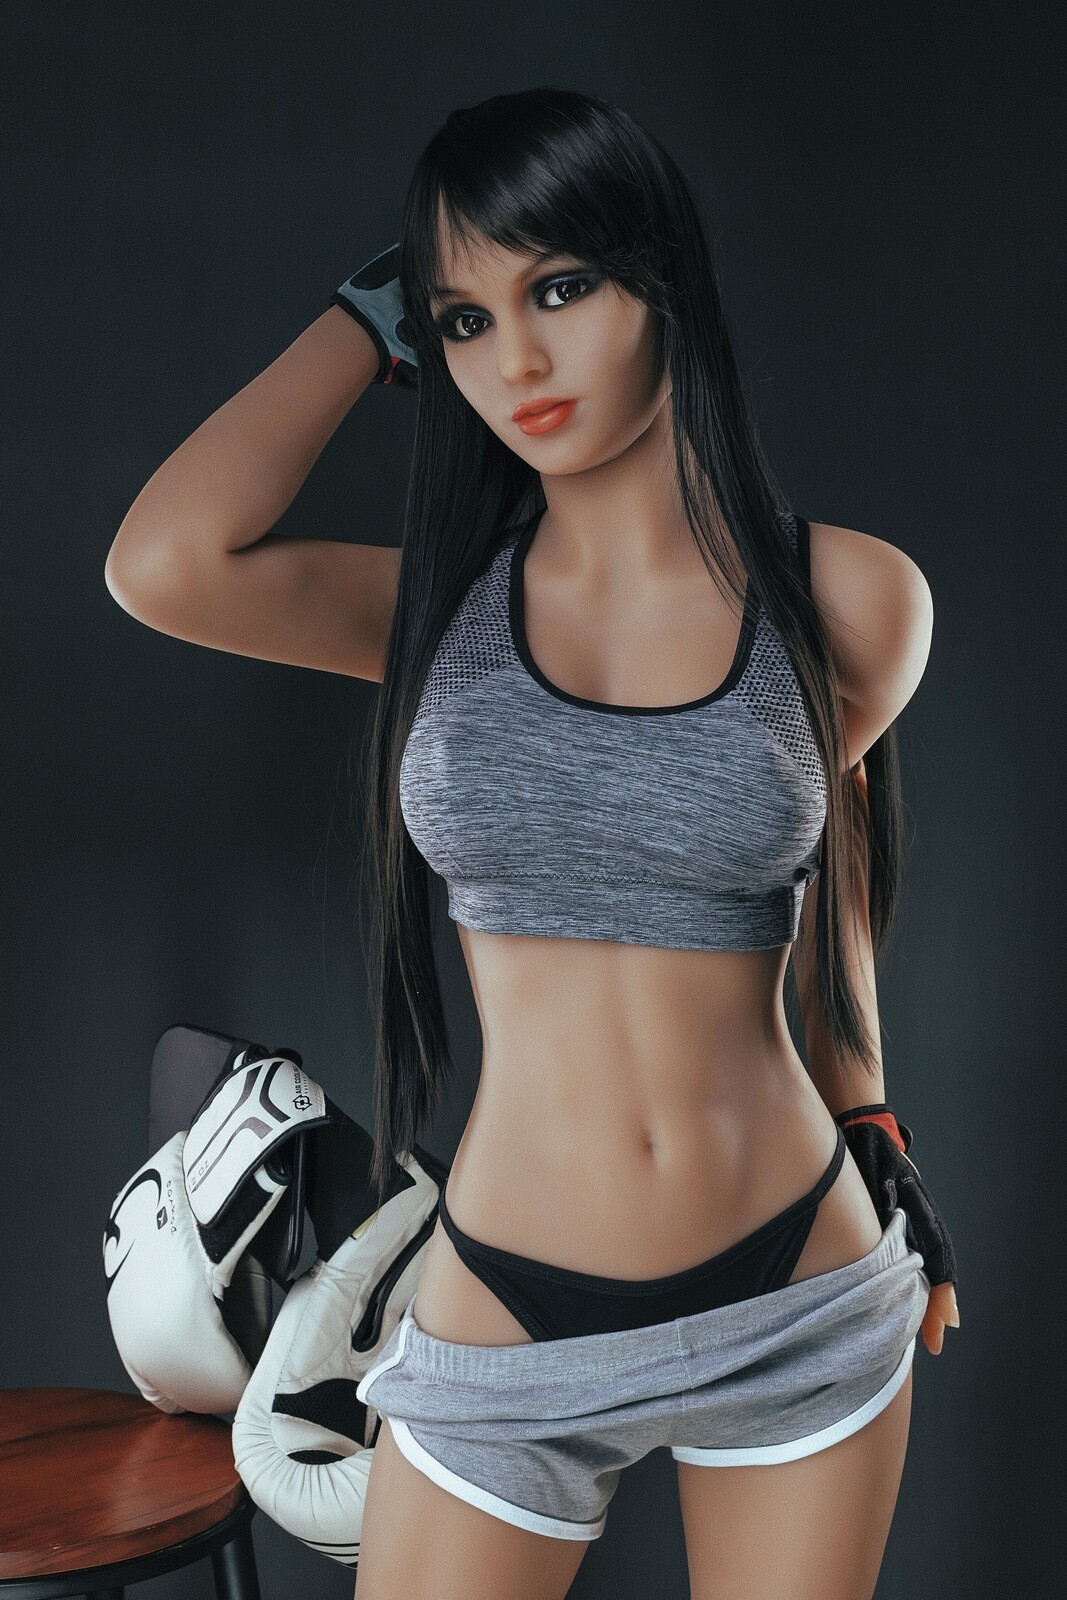 166cm C-Cup (5’4 ft) Athletic Real Sexdoll with the Right Curves